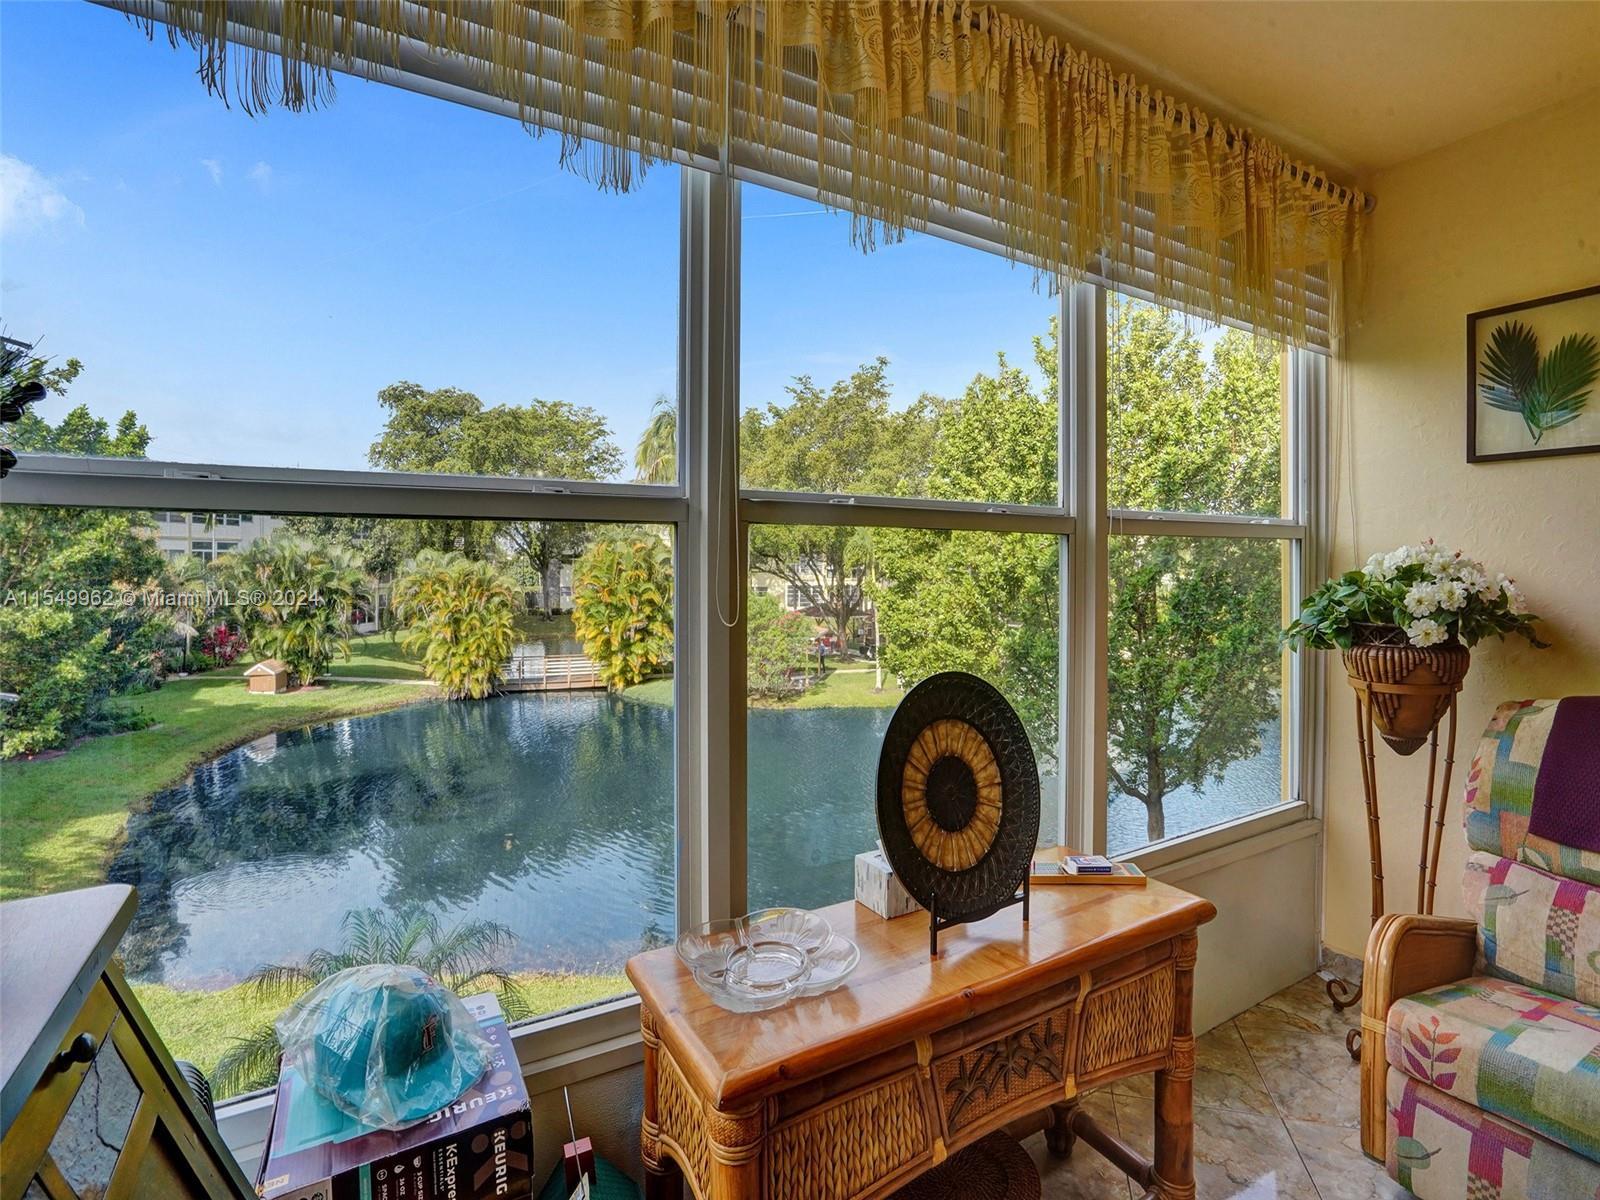 Photo of 5141 W Oakland Park Blvd #201 in Lauderdale Lakes, FL